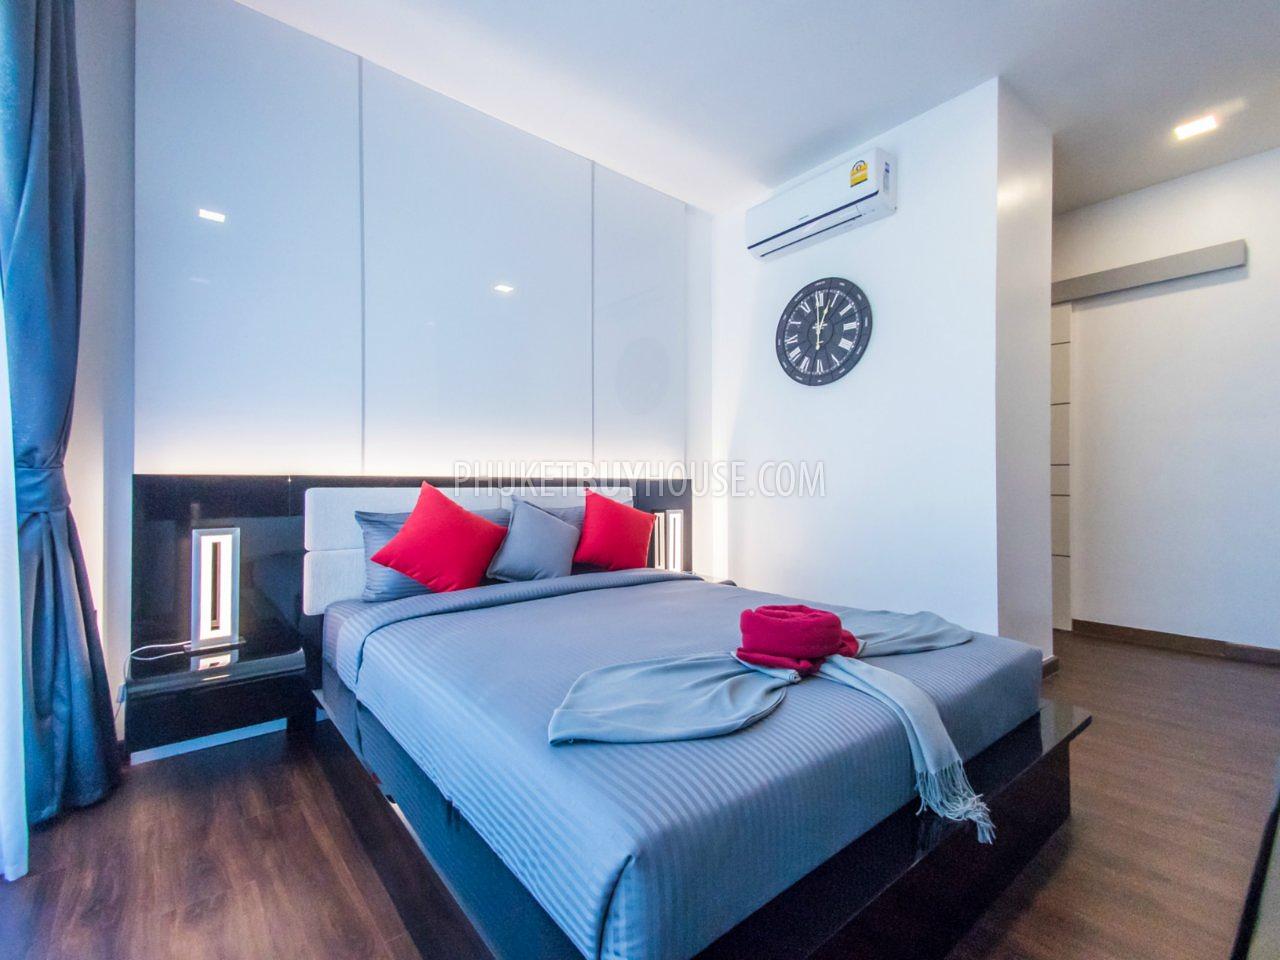 BAN5751: New project of Apartment-Studio in walking distance to Bang Tao beach. Photo #19